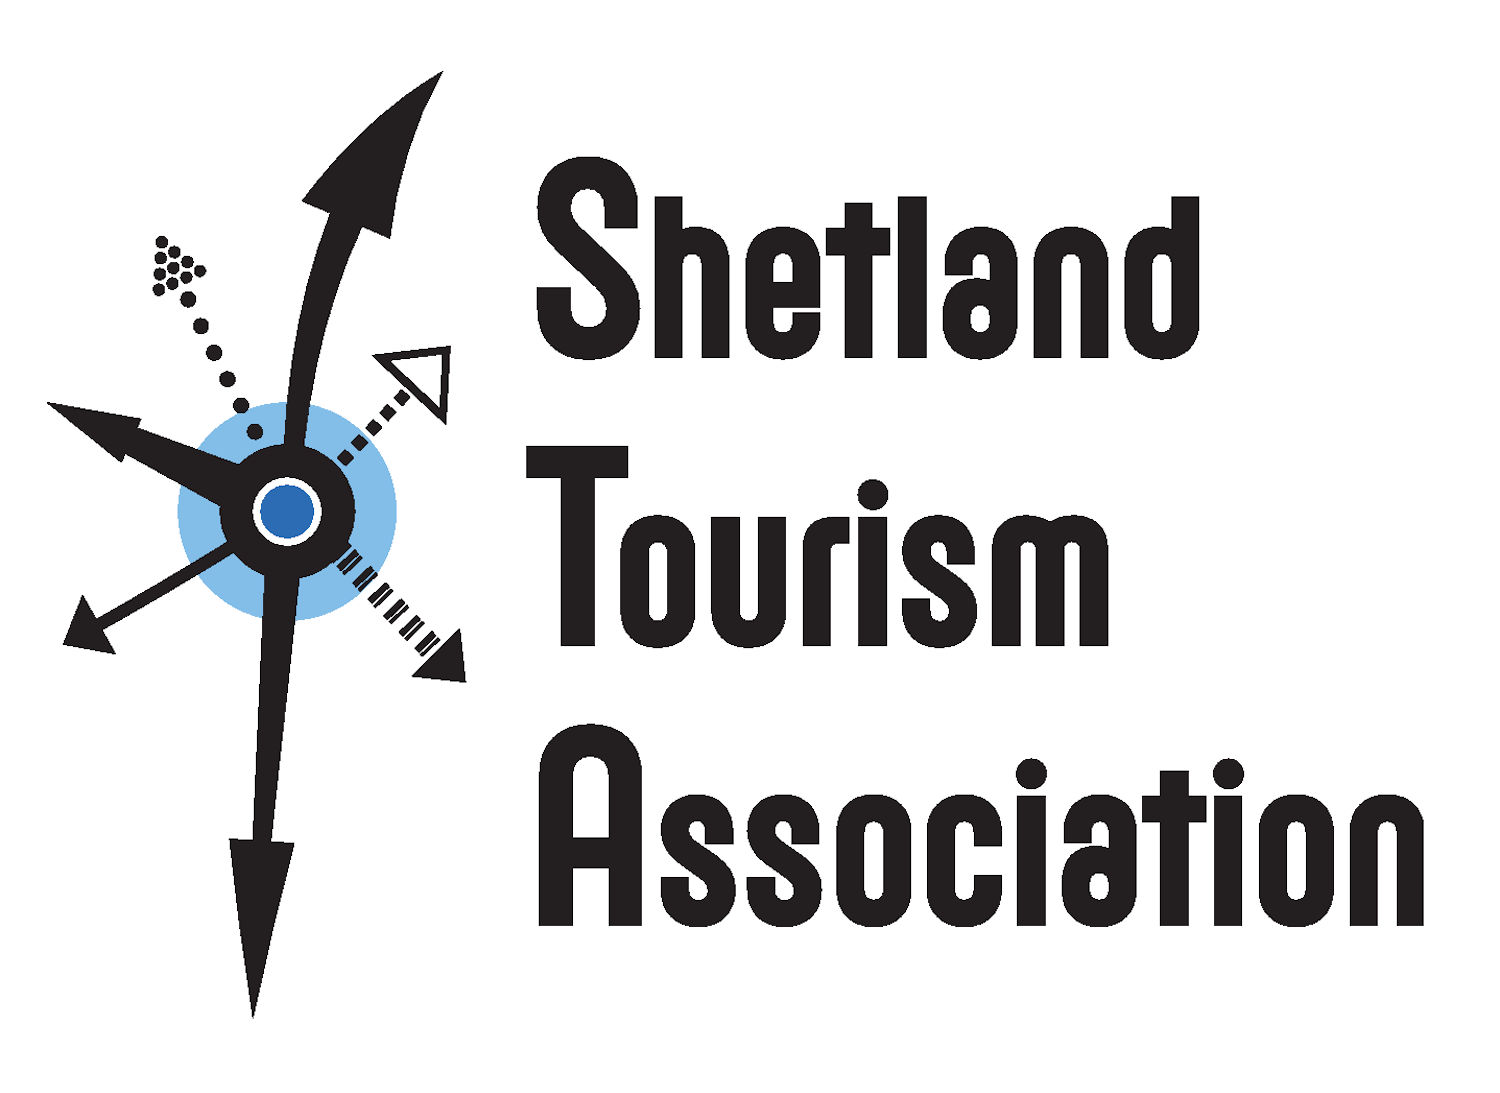 Tourism analysis to begin next week in bid to move on from Covid pandemic - The Shetland Times